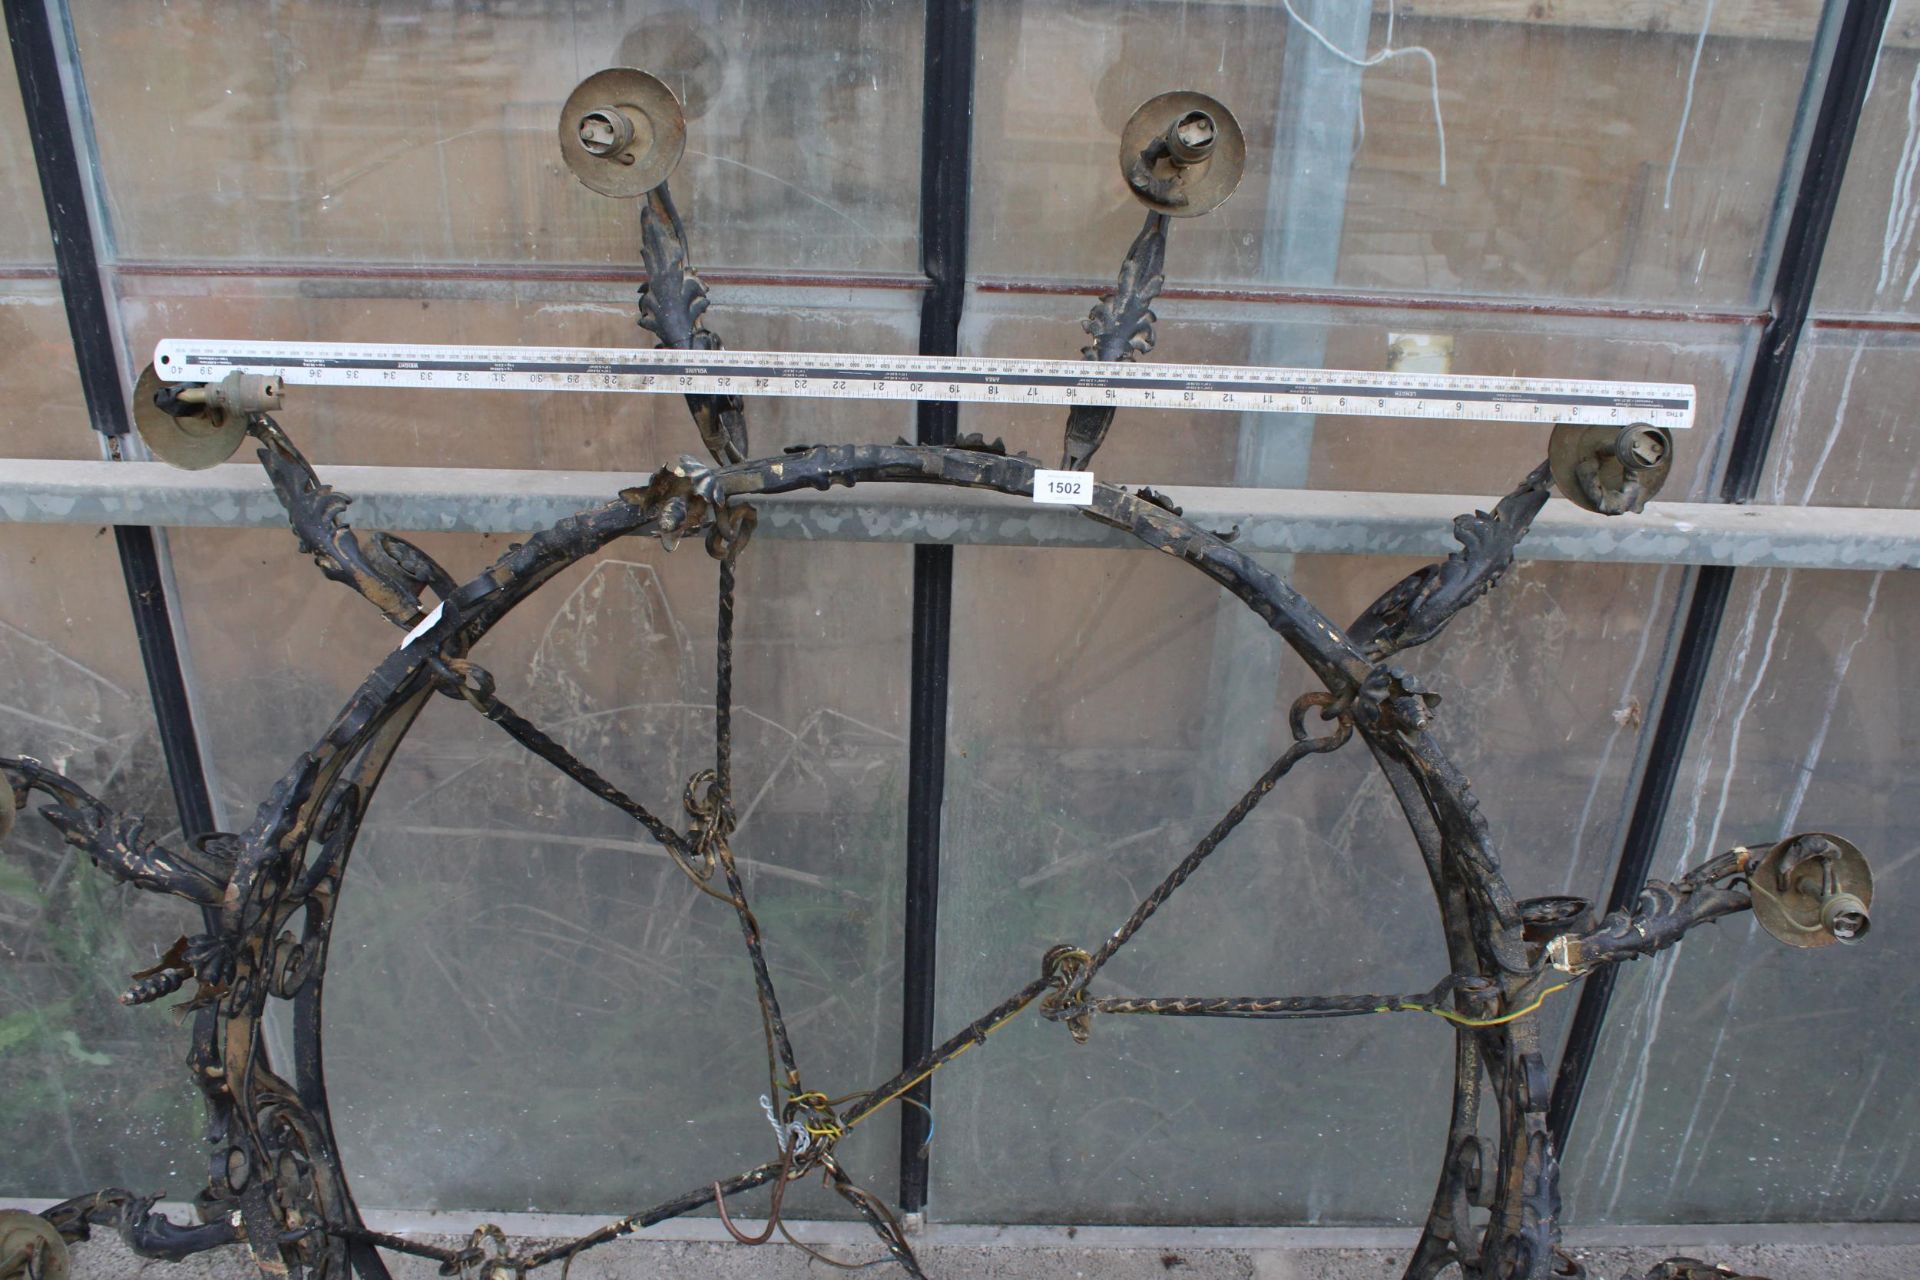 A LARGE HEAVY WROUGHT IRON 12 BRANCH CEILING LIGHT FITTING WITH HANGING BARS (D:146CM) - Image 3 of 4